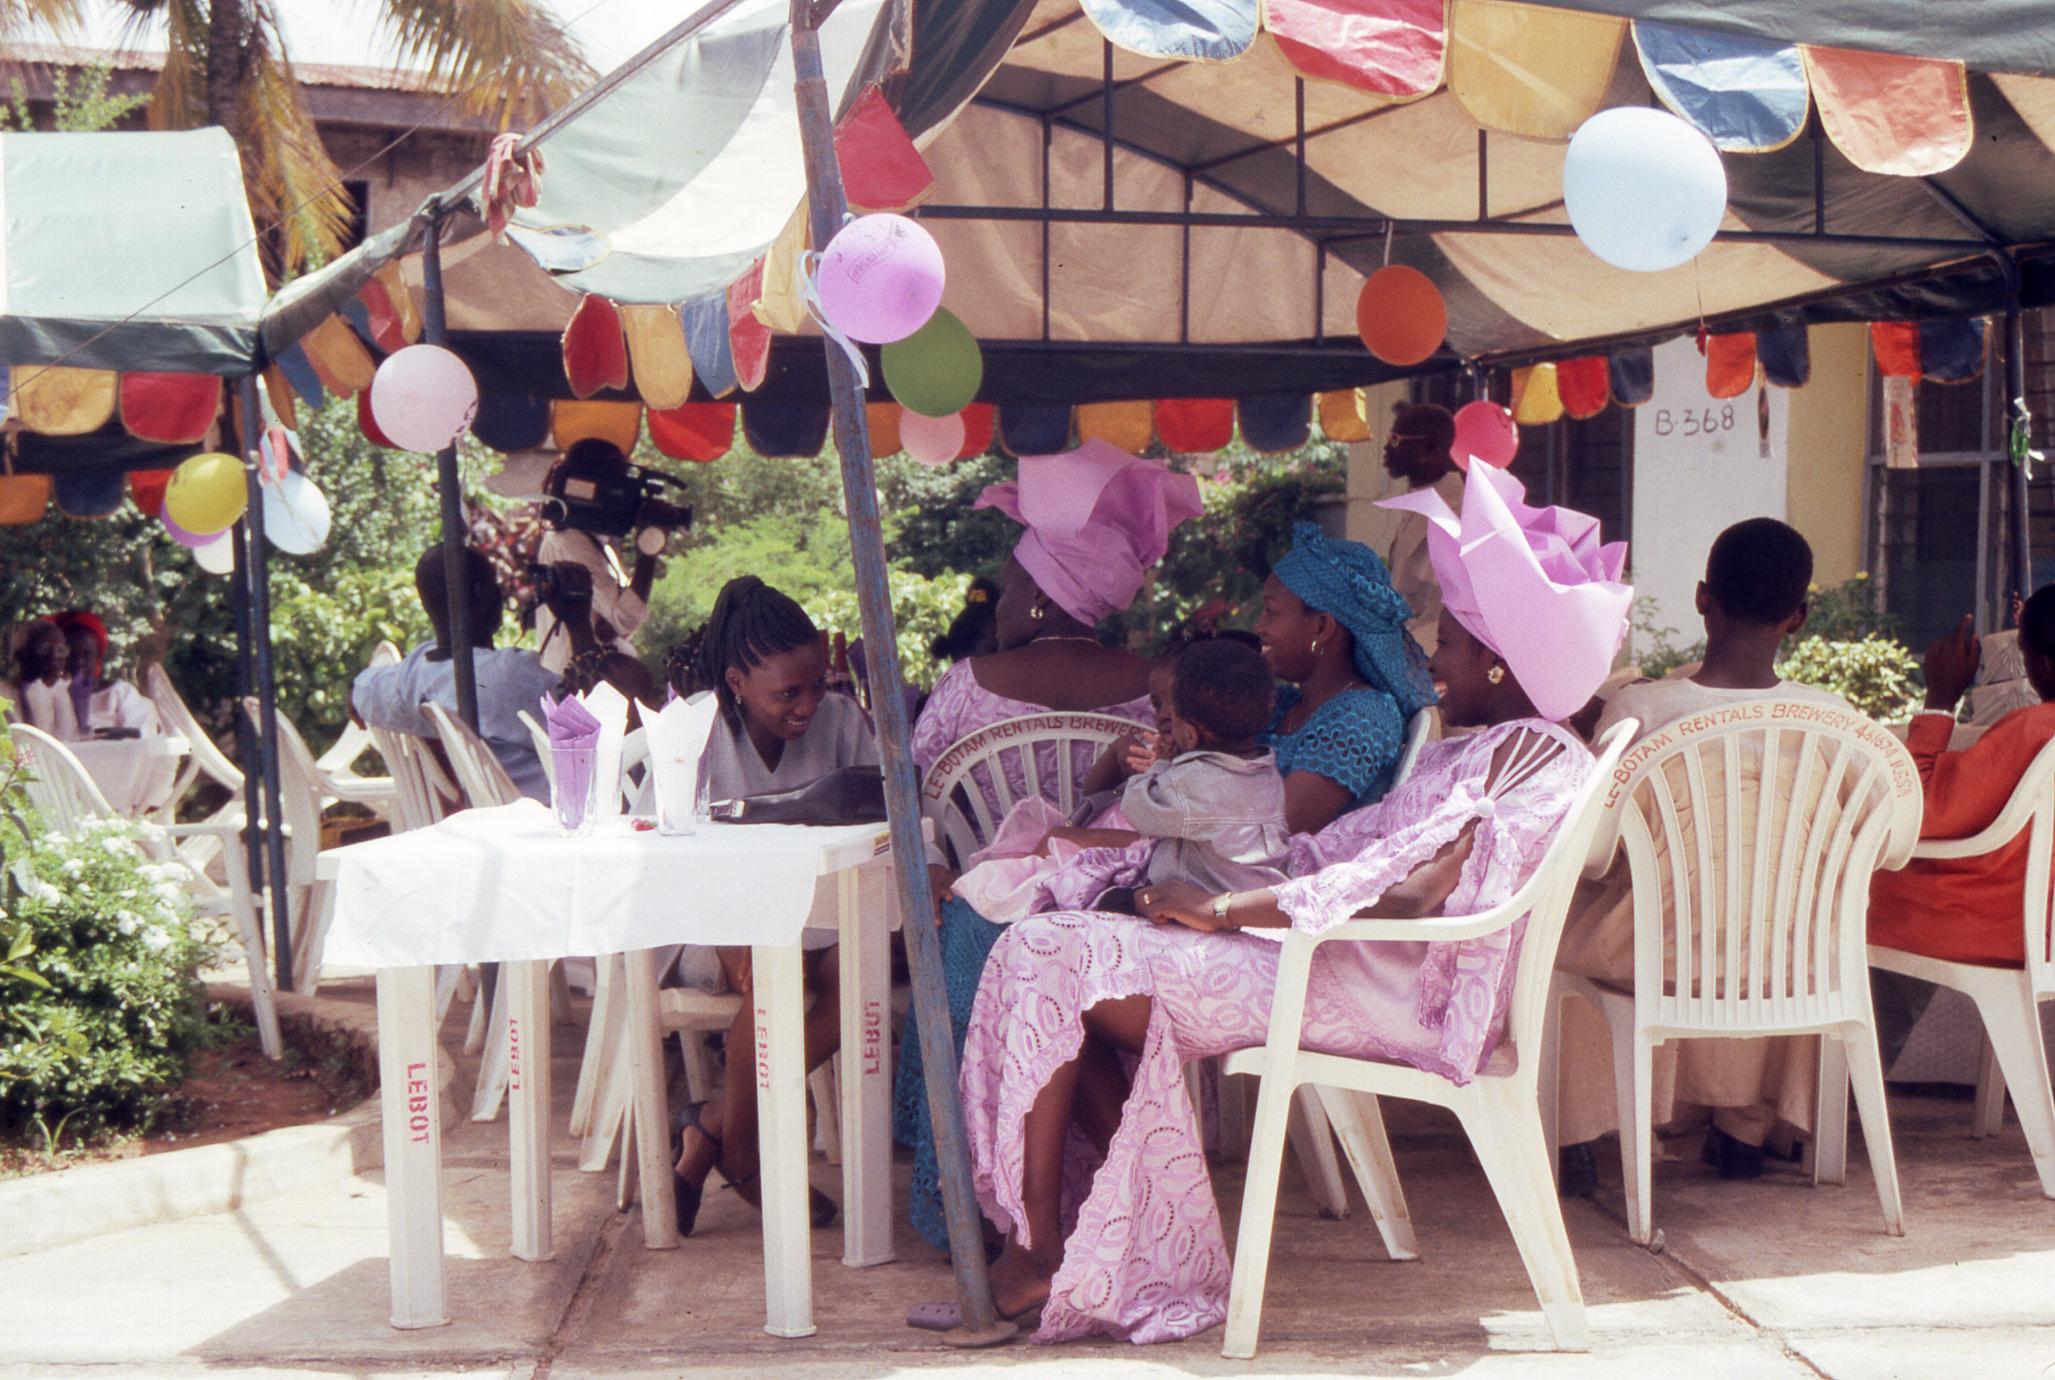 People and decorations at Tinu Ifaturoti's birthday party